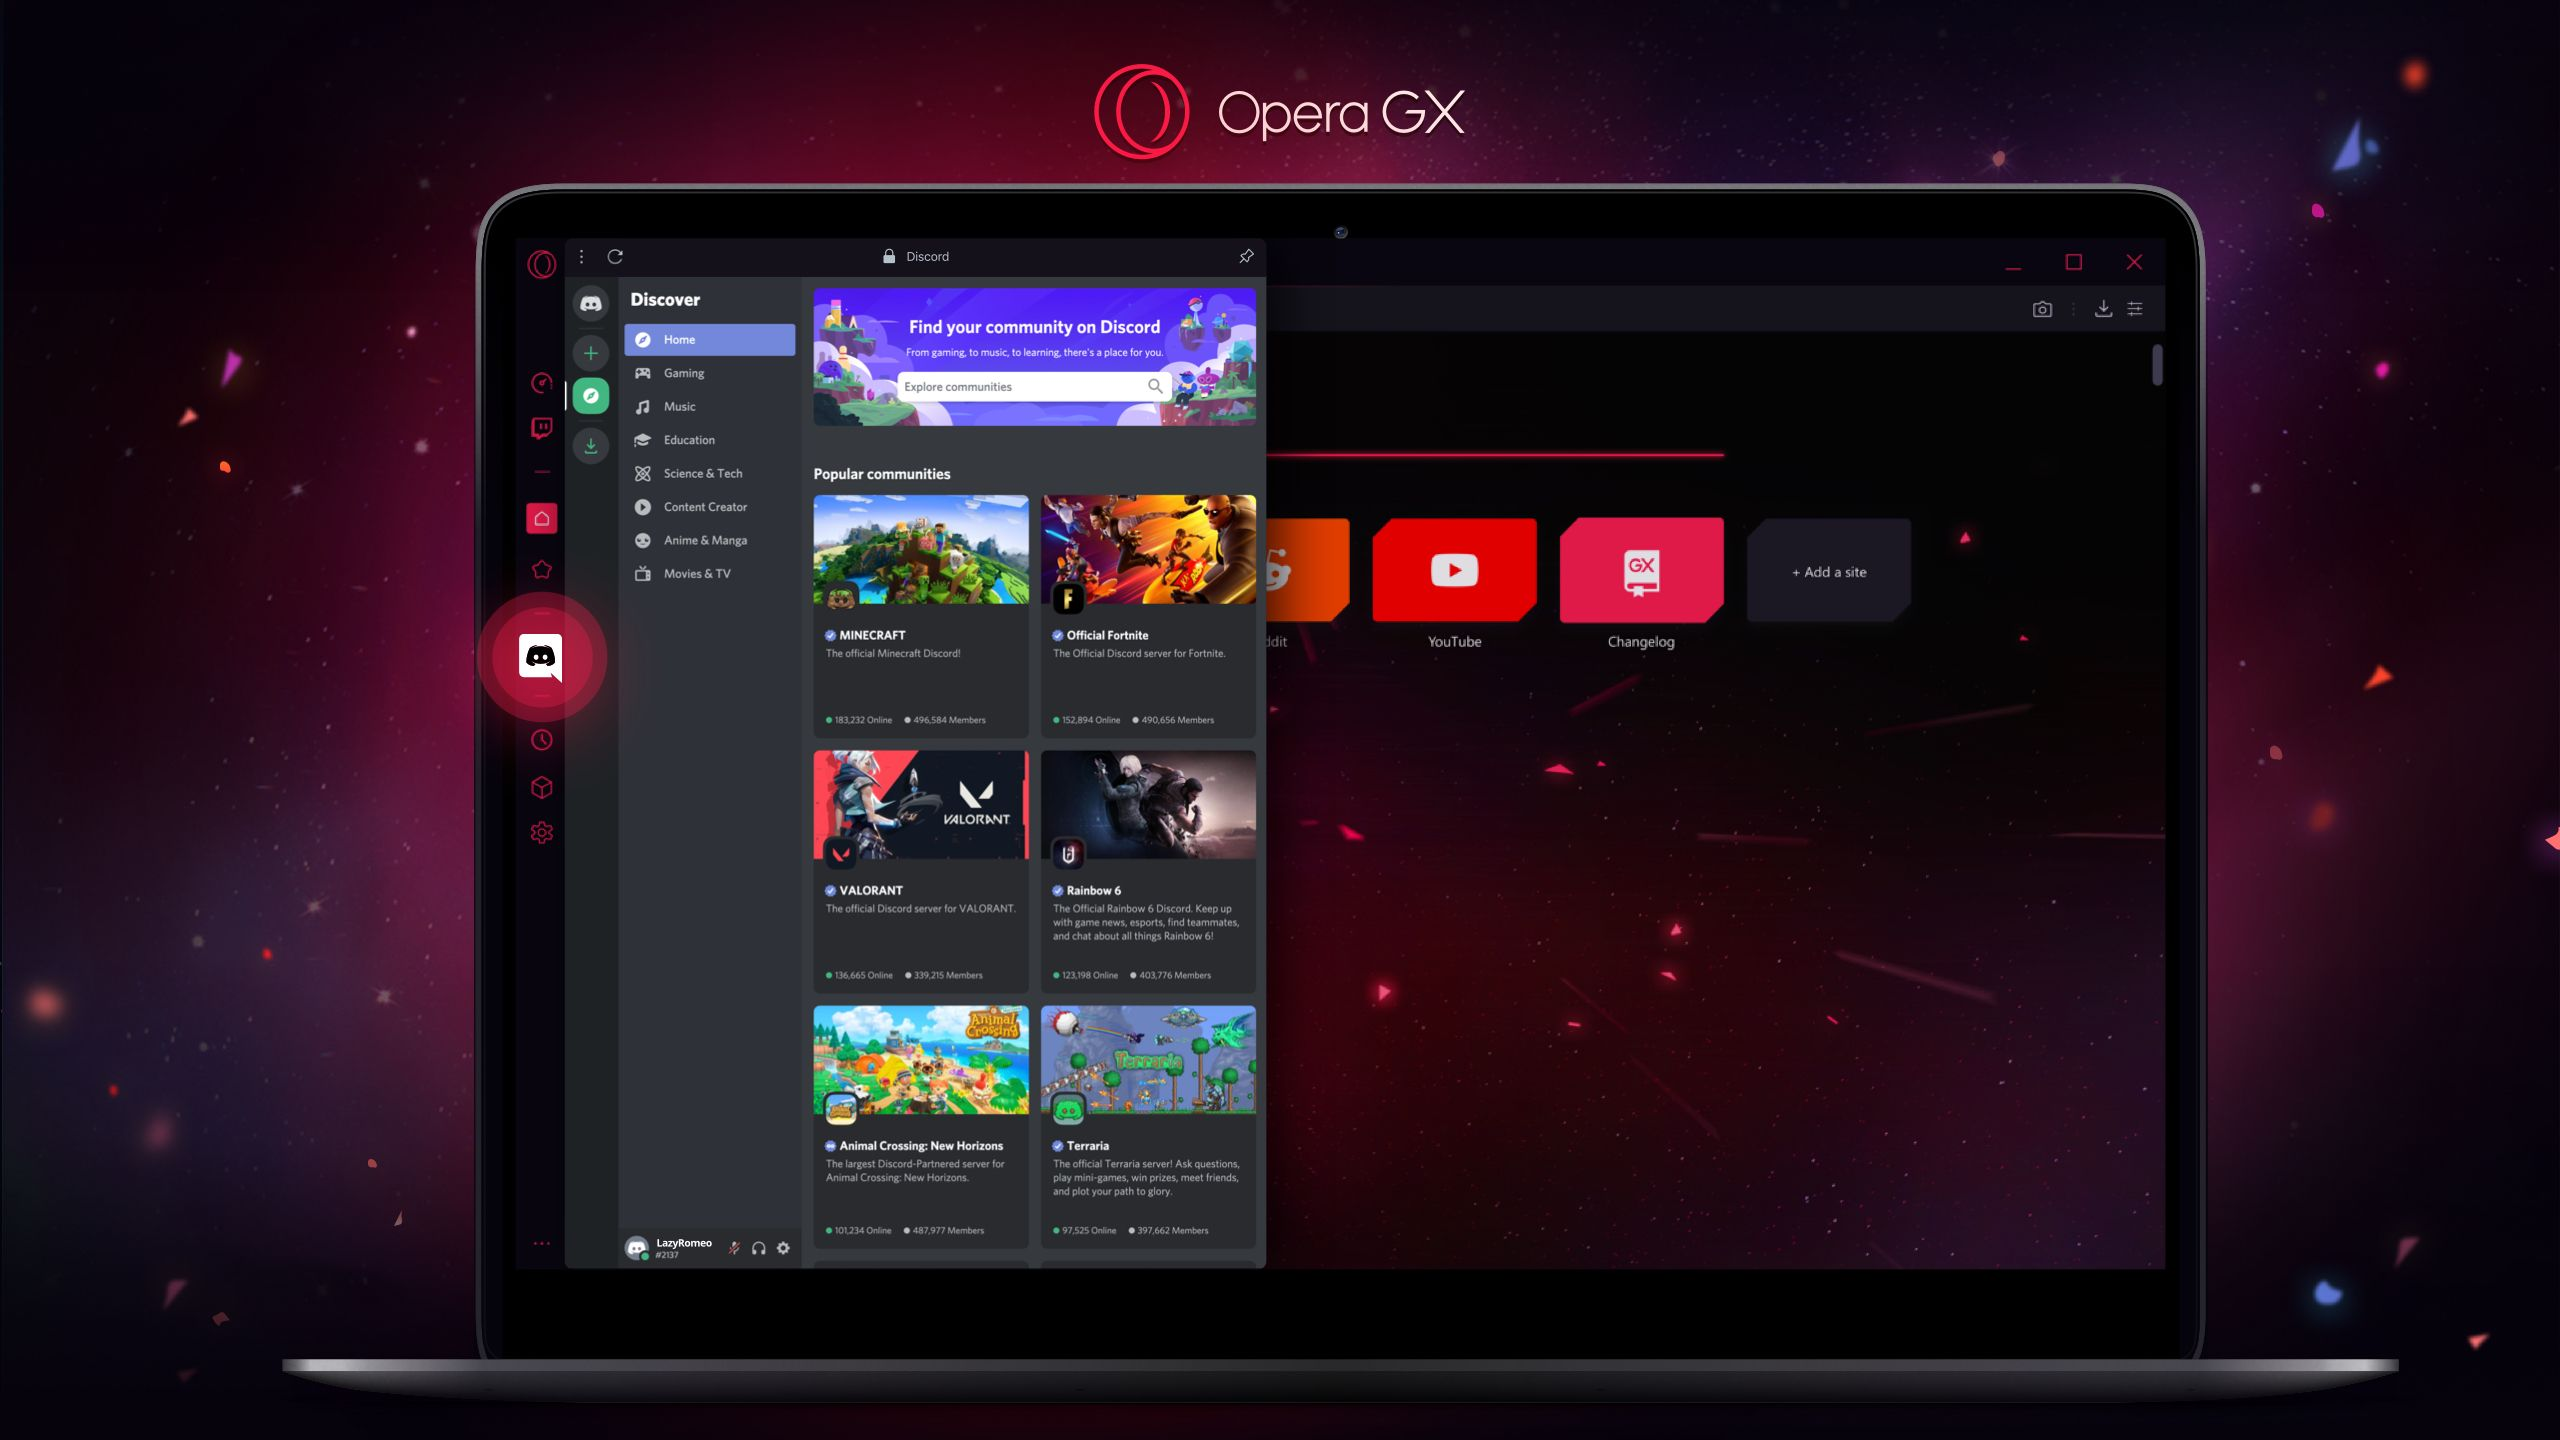 download the new for android Opera GX 101.0.4843.55